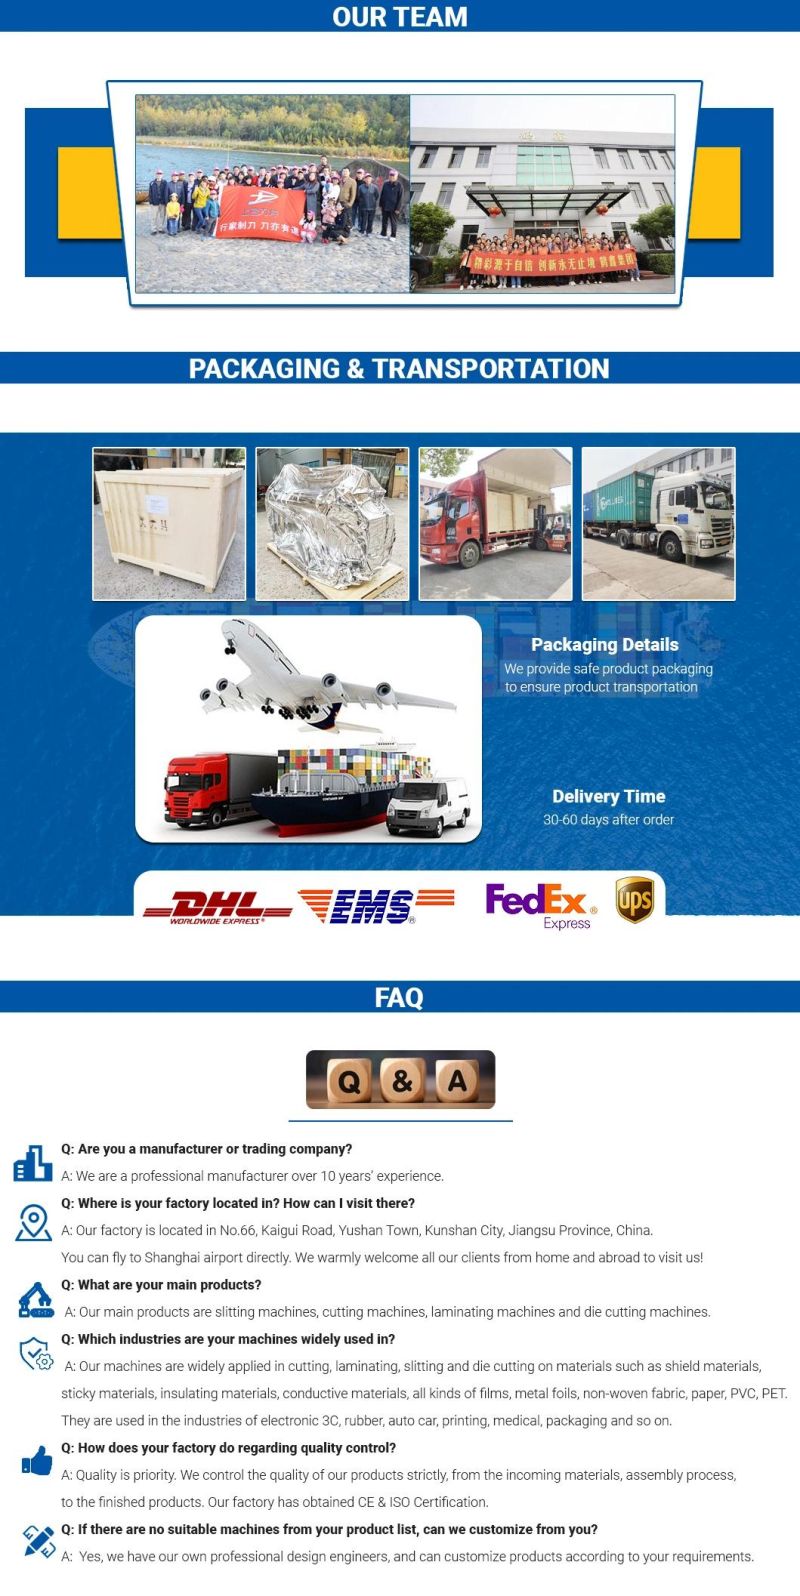 Online New Hexin Copper Foil Cutting Machine for Satin/Elastic/Adhesive Tape